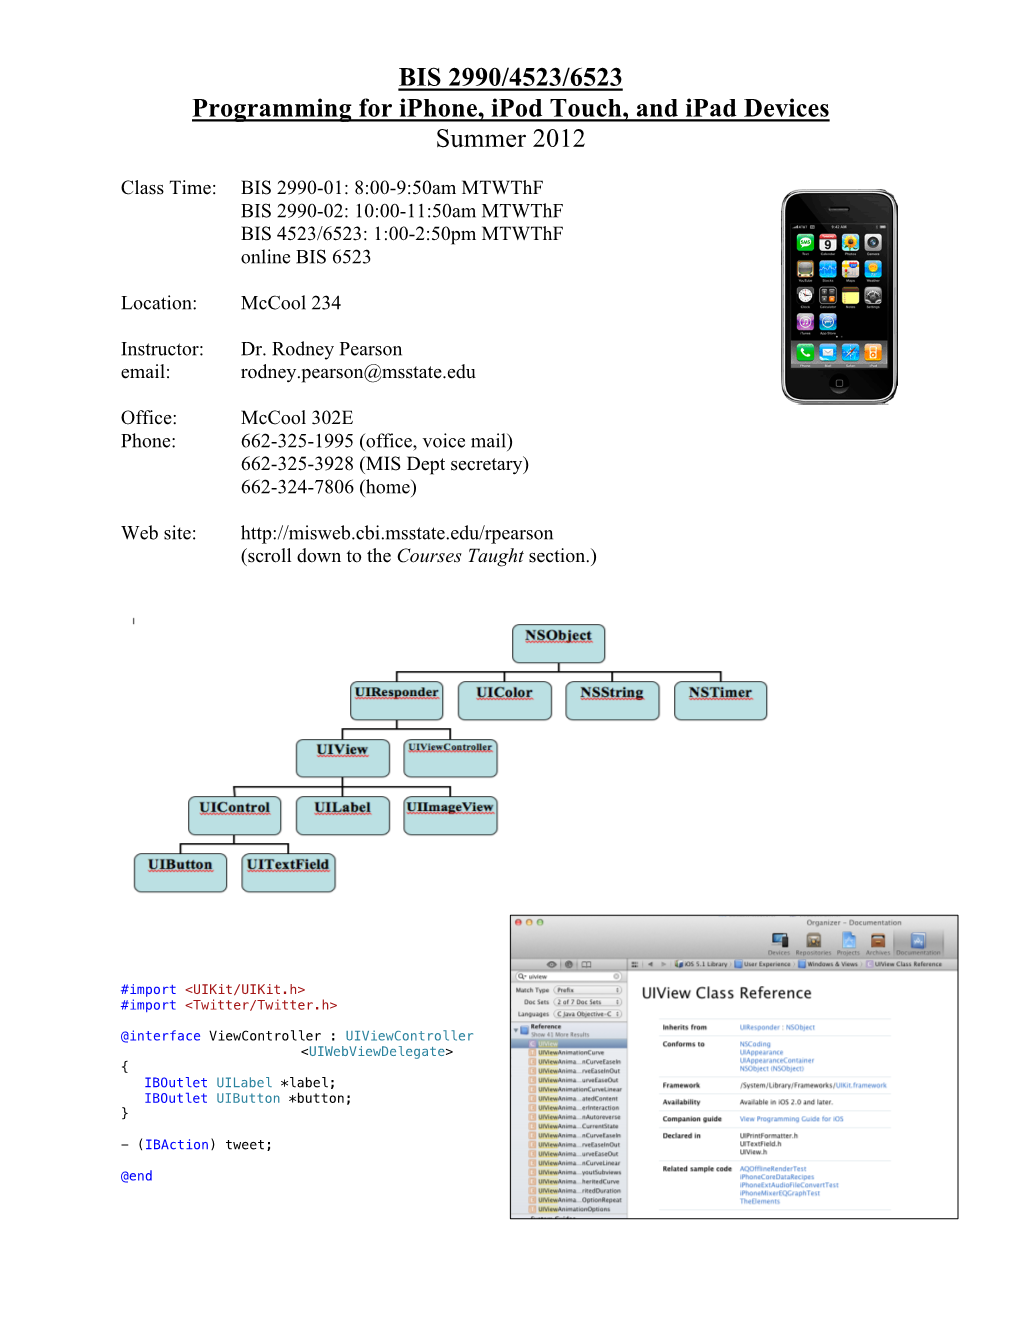 BIS 2990/4523/6523 Programming for Iphone, Ipod Touch, and Ipad Devices Summer 2012